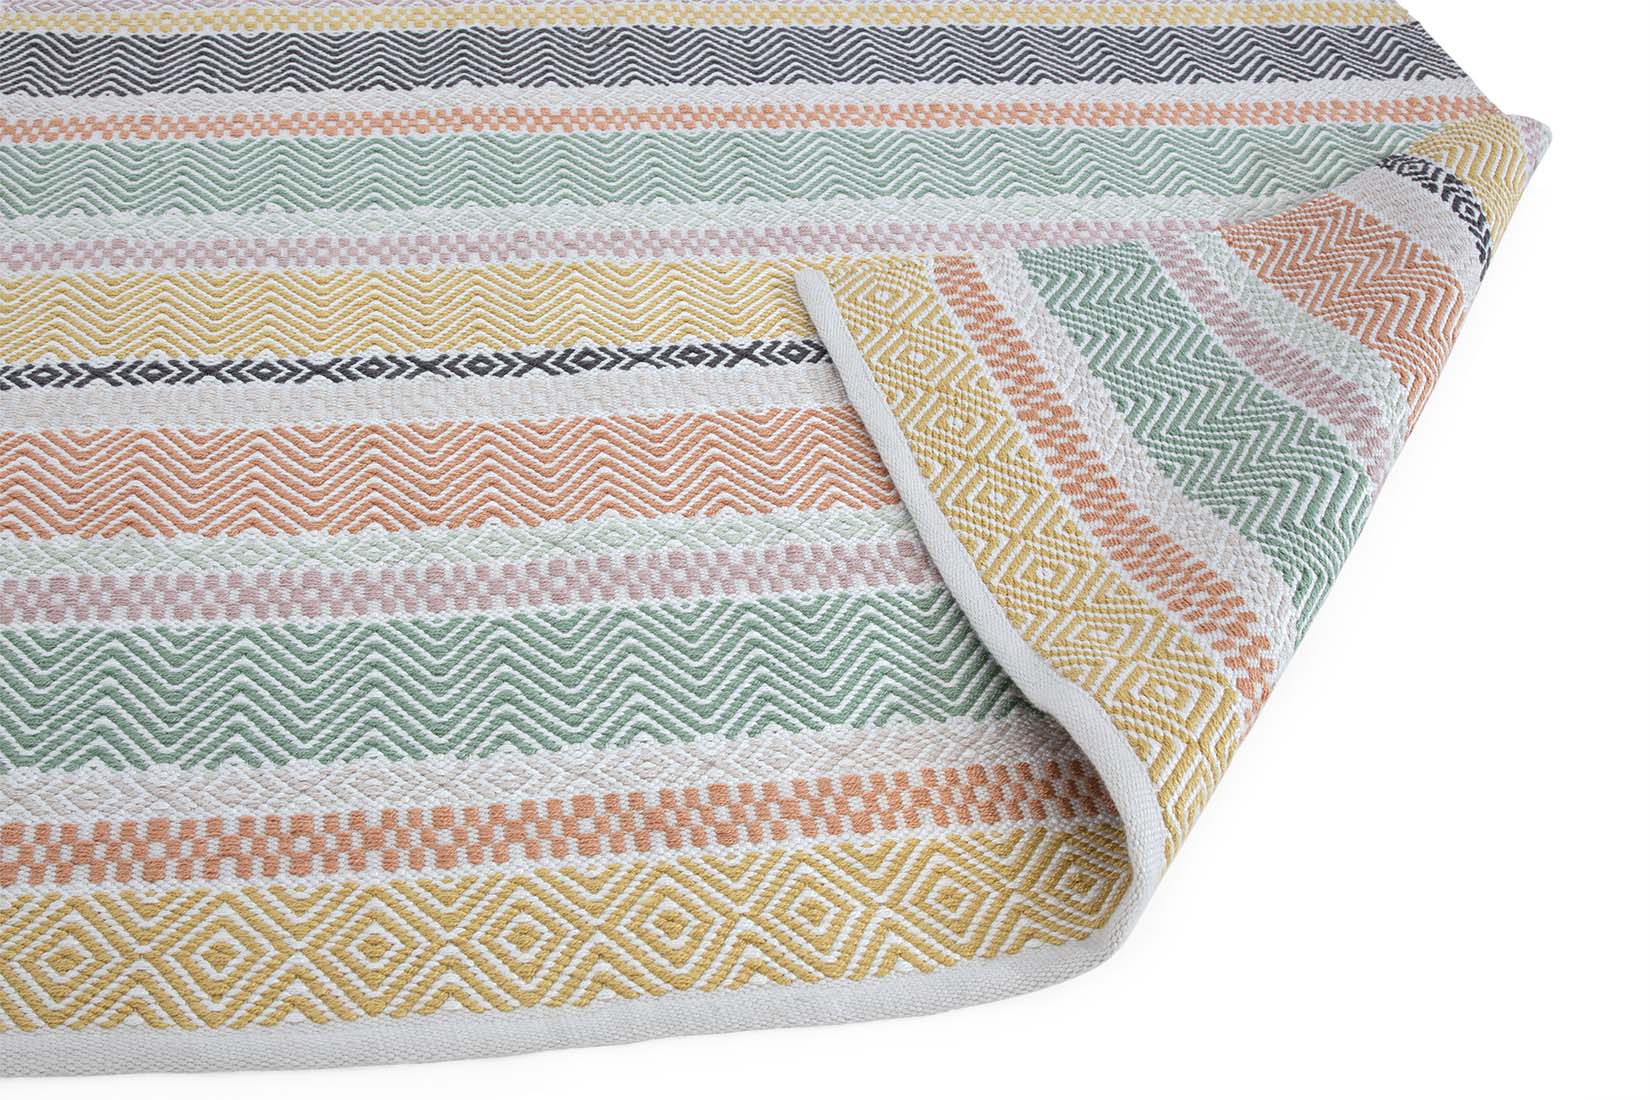 multicolour indoor/outdoor rug with stripe pattern
